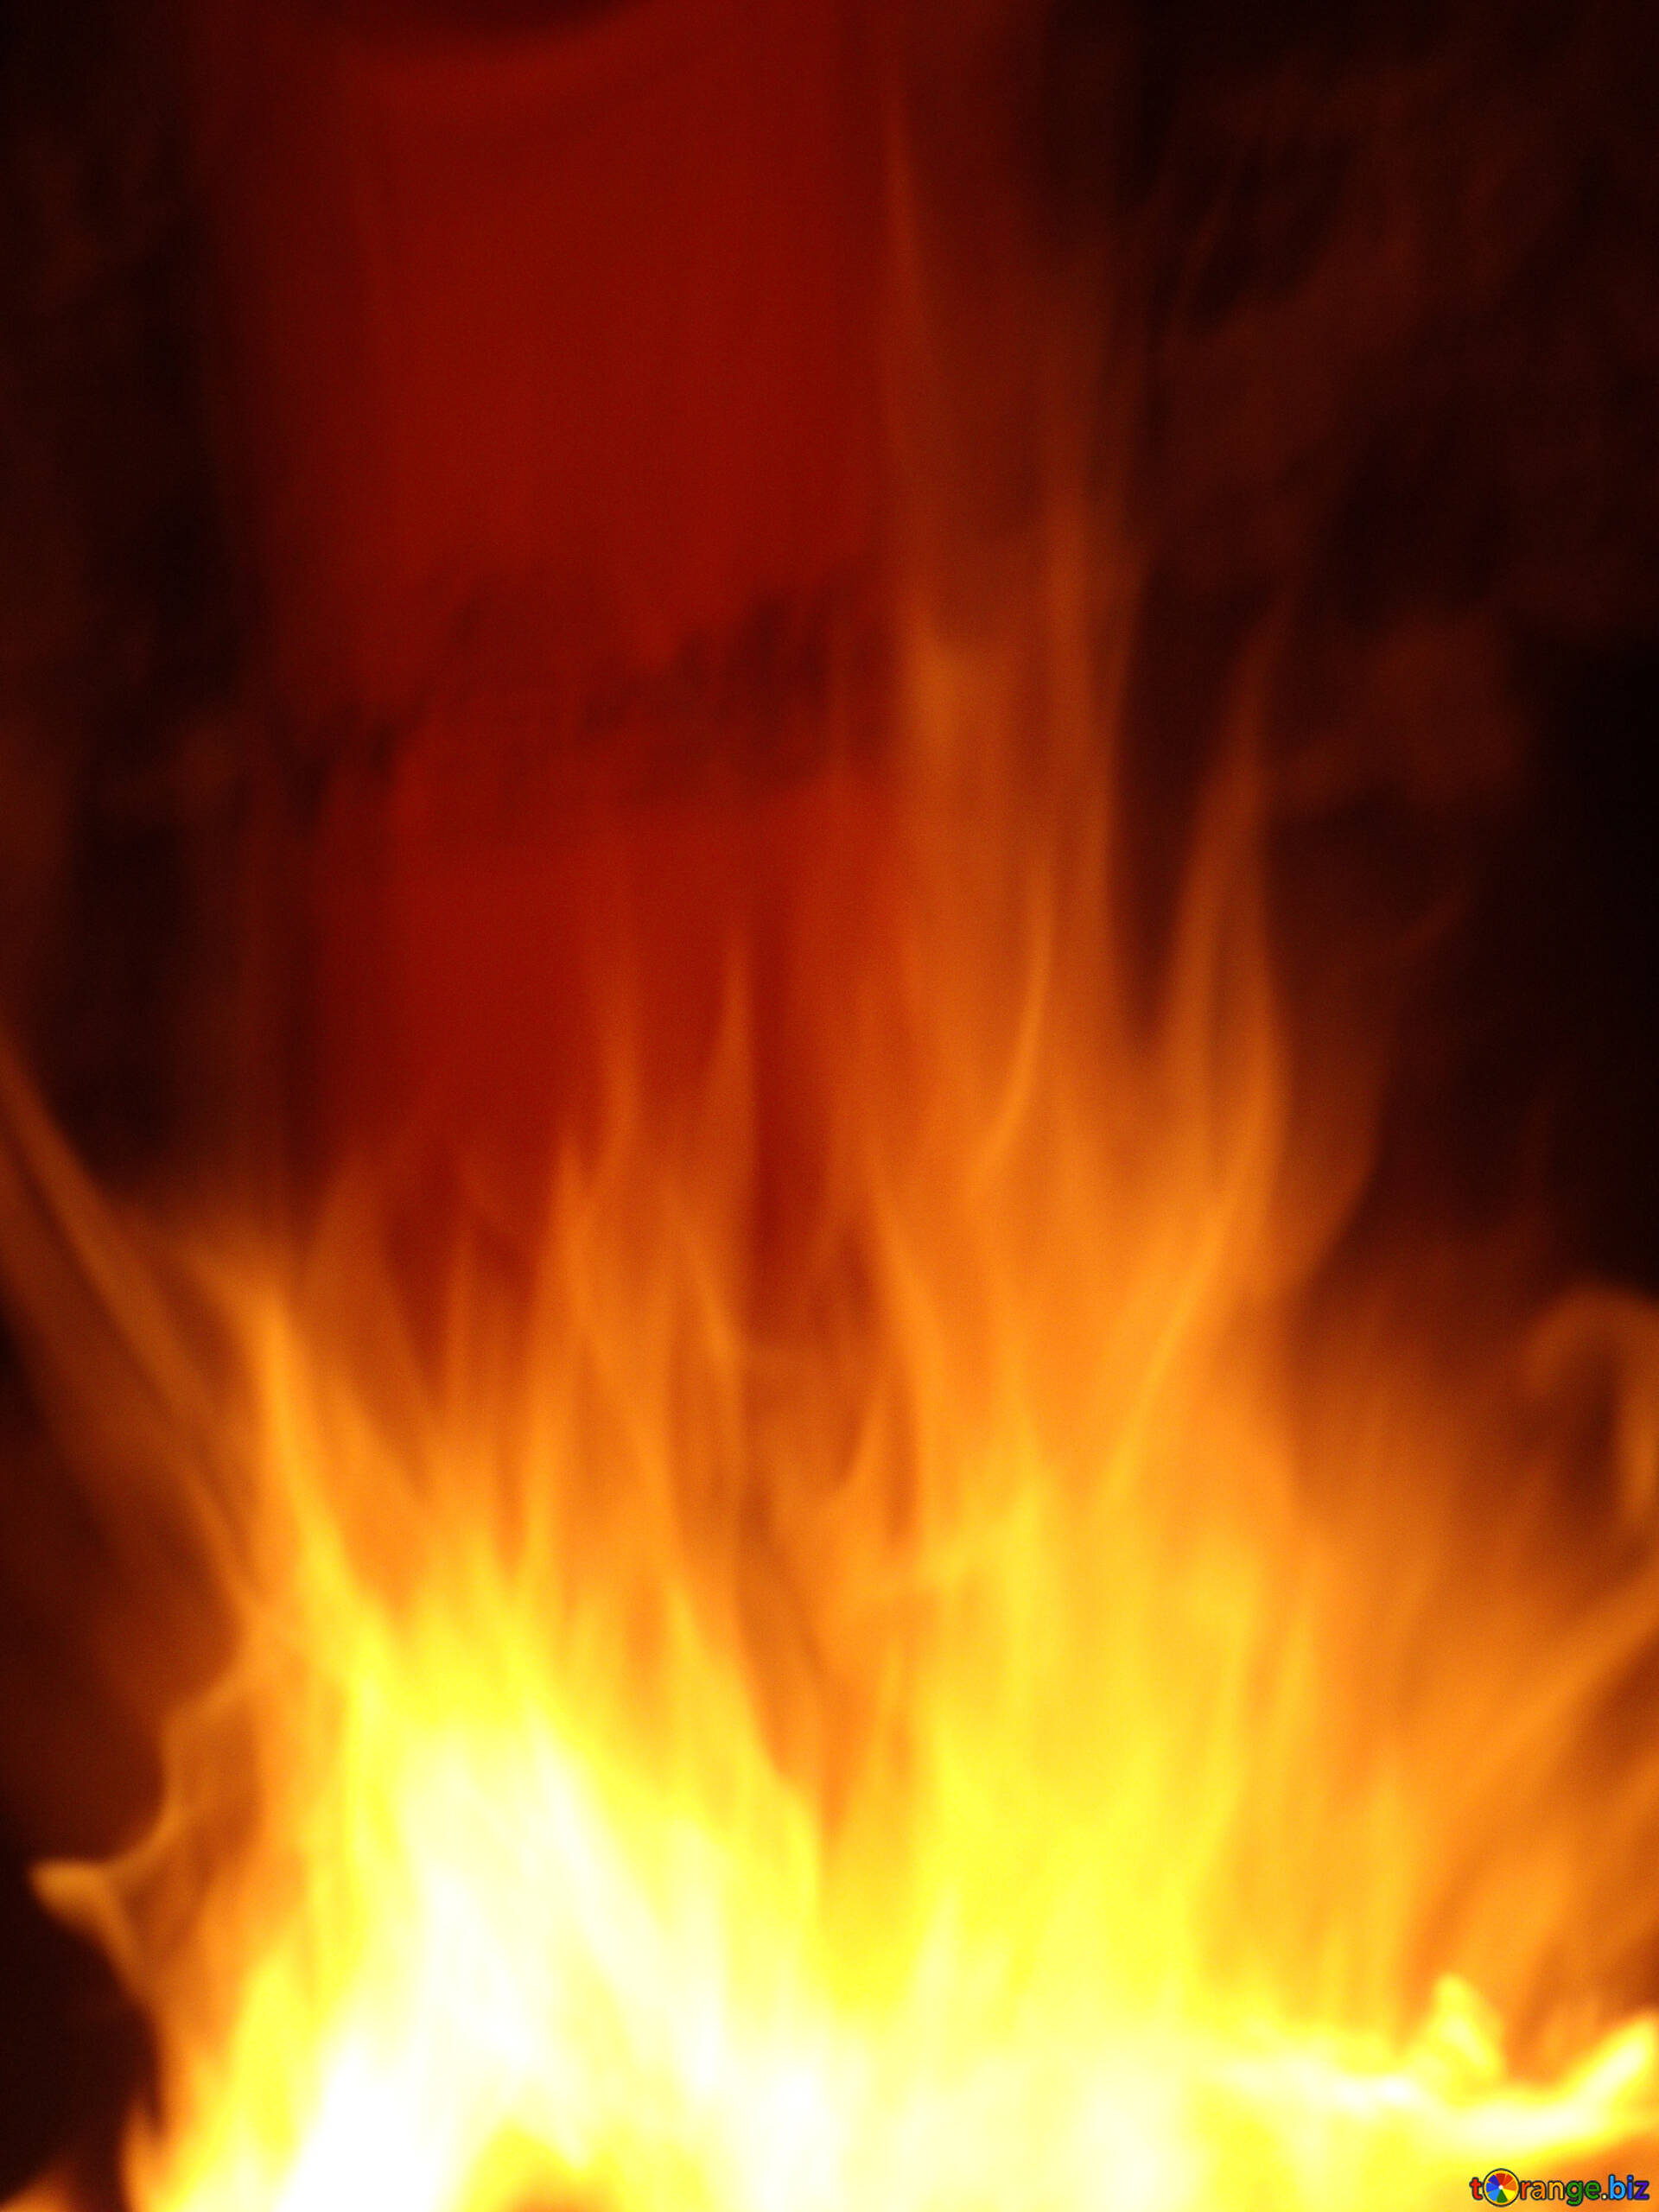 Blurred backgrounds image background. fire wall. images texture № 9546 |   ~ free pics on cc-by license